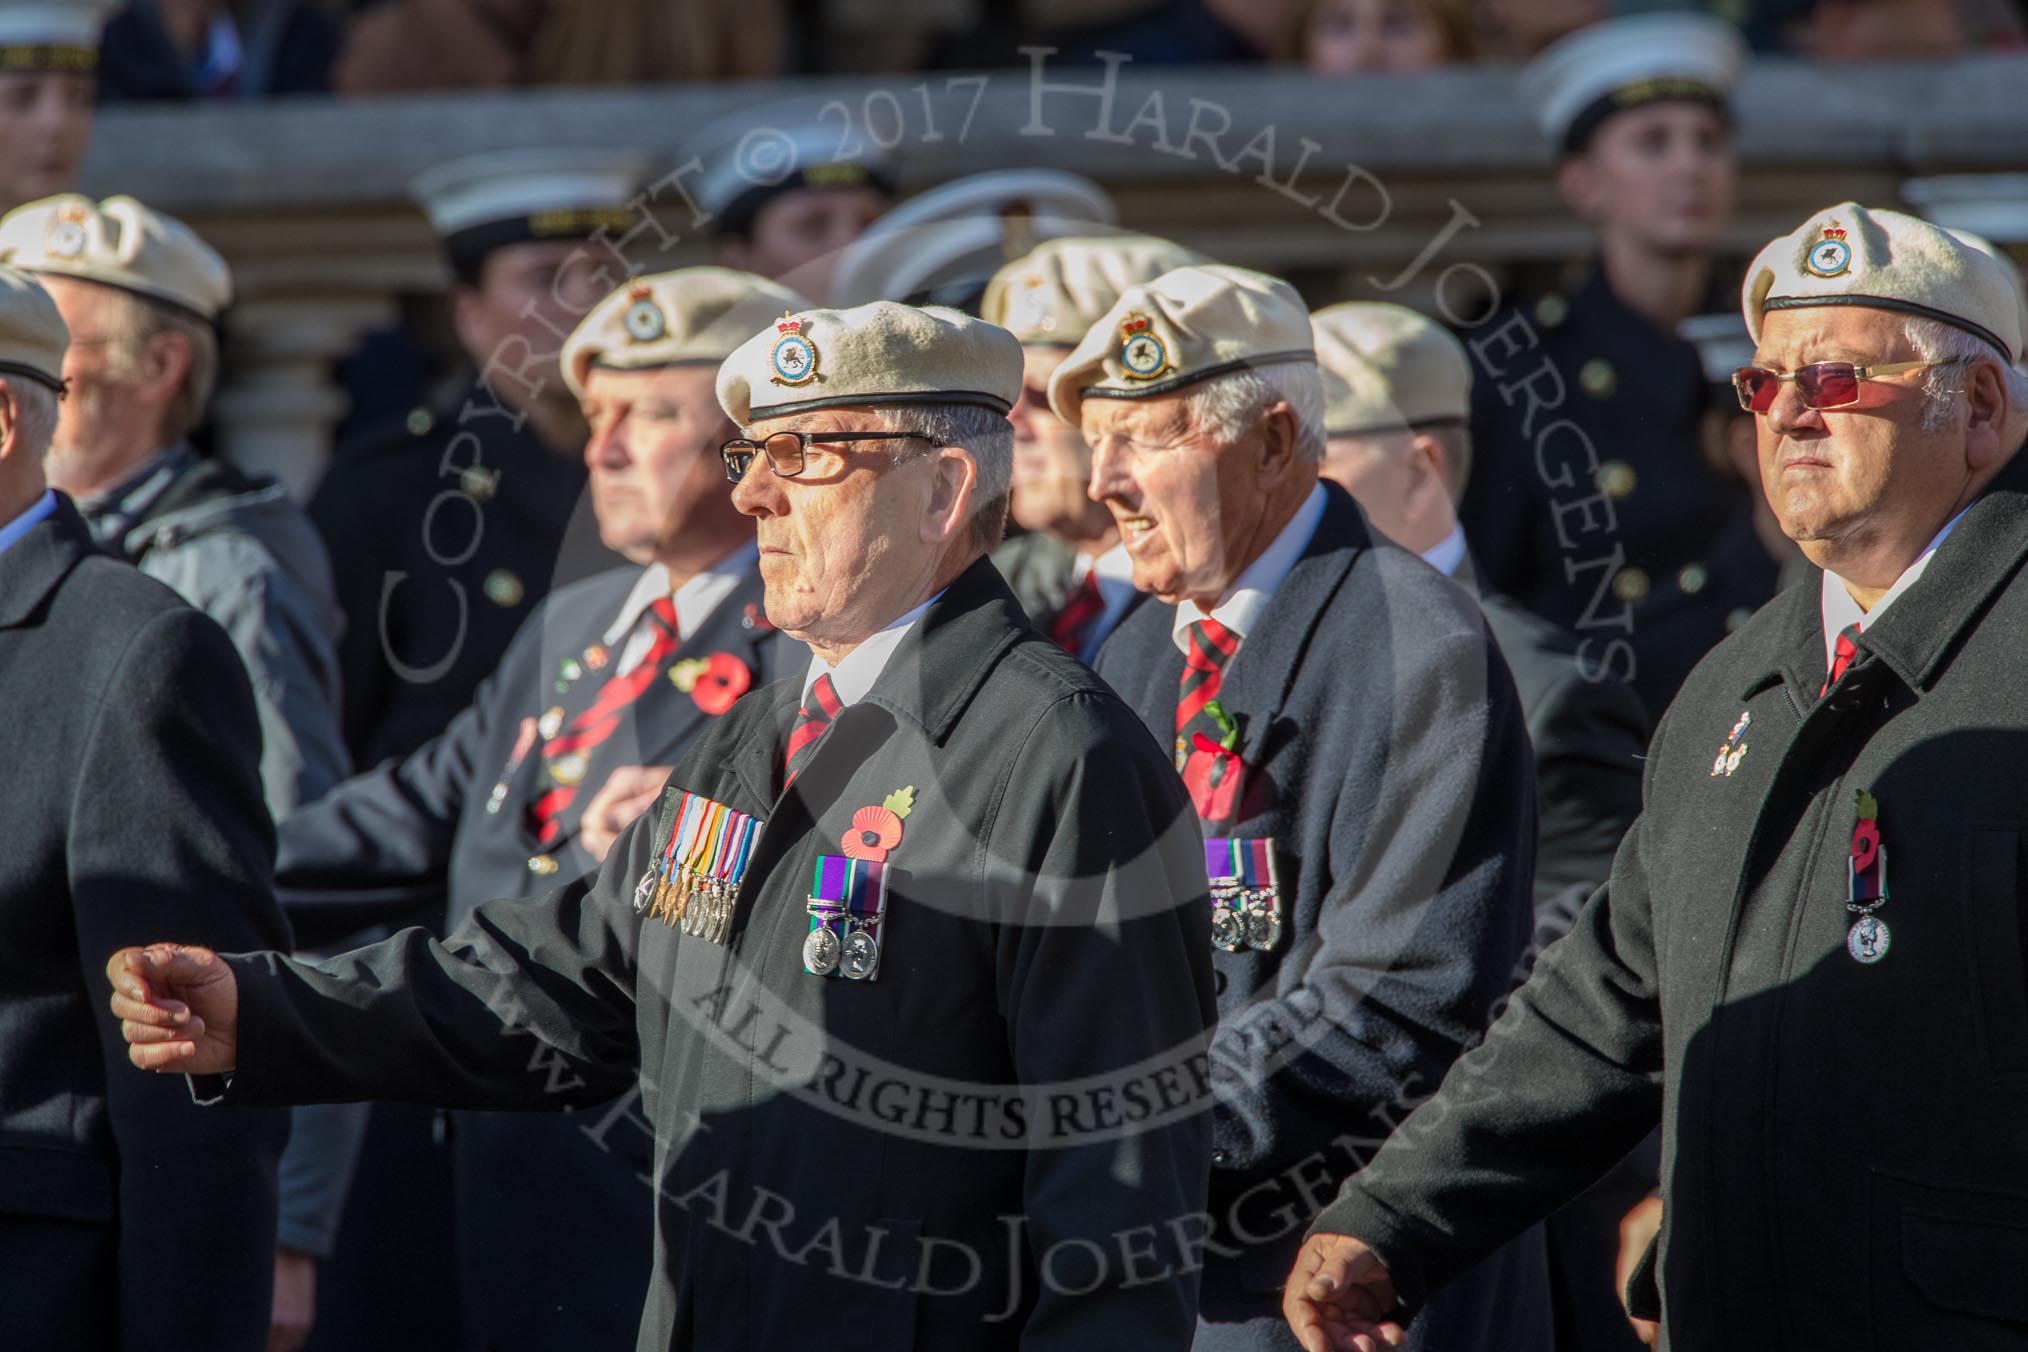 Royal Air Force Police Association (Group C2, 60 members) during the Royal British Legion March Past on Remembrance Sunday at the Cenotaph, Whitehall, Westminster, London, 11 November 2018, 12:14.